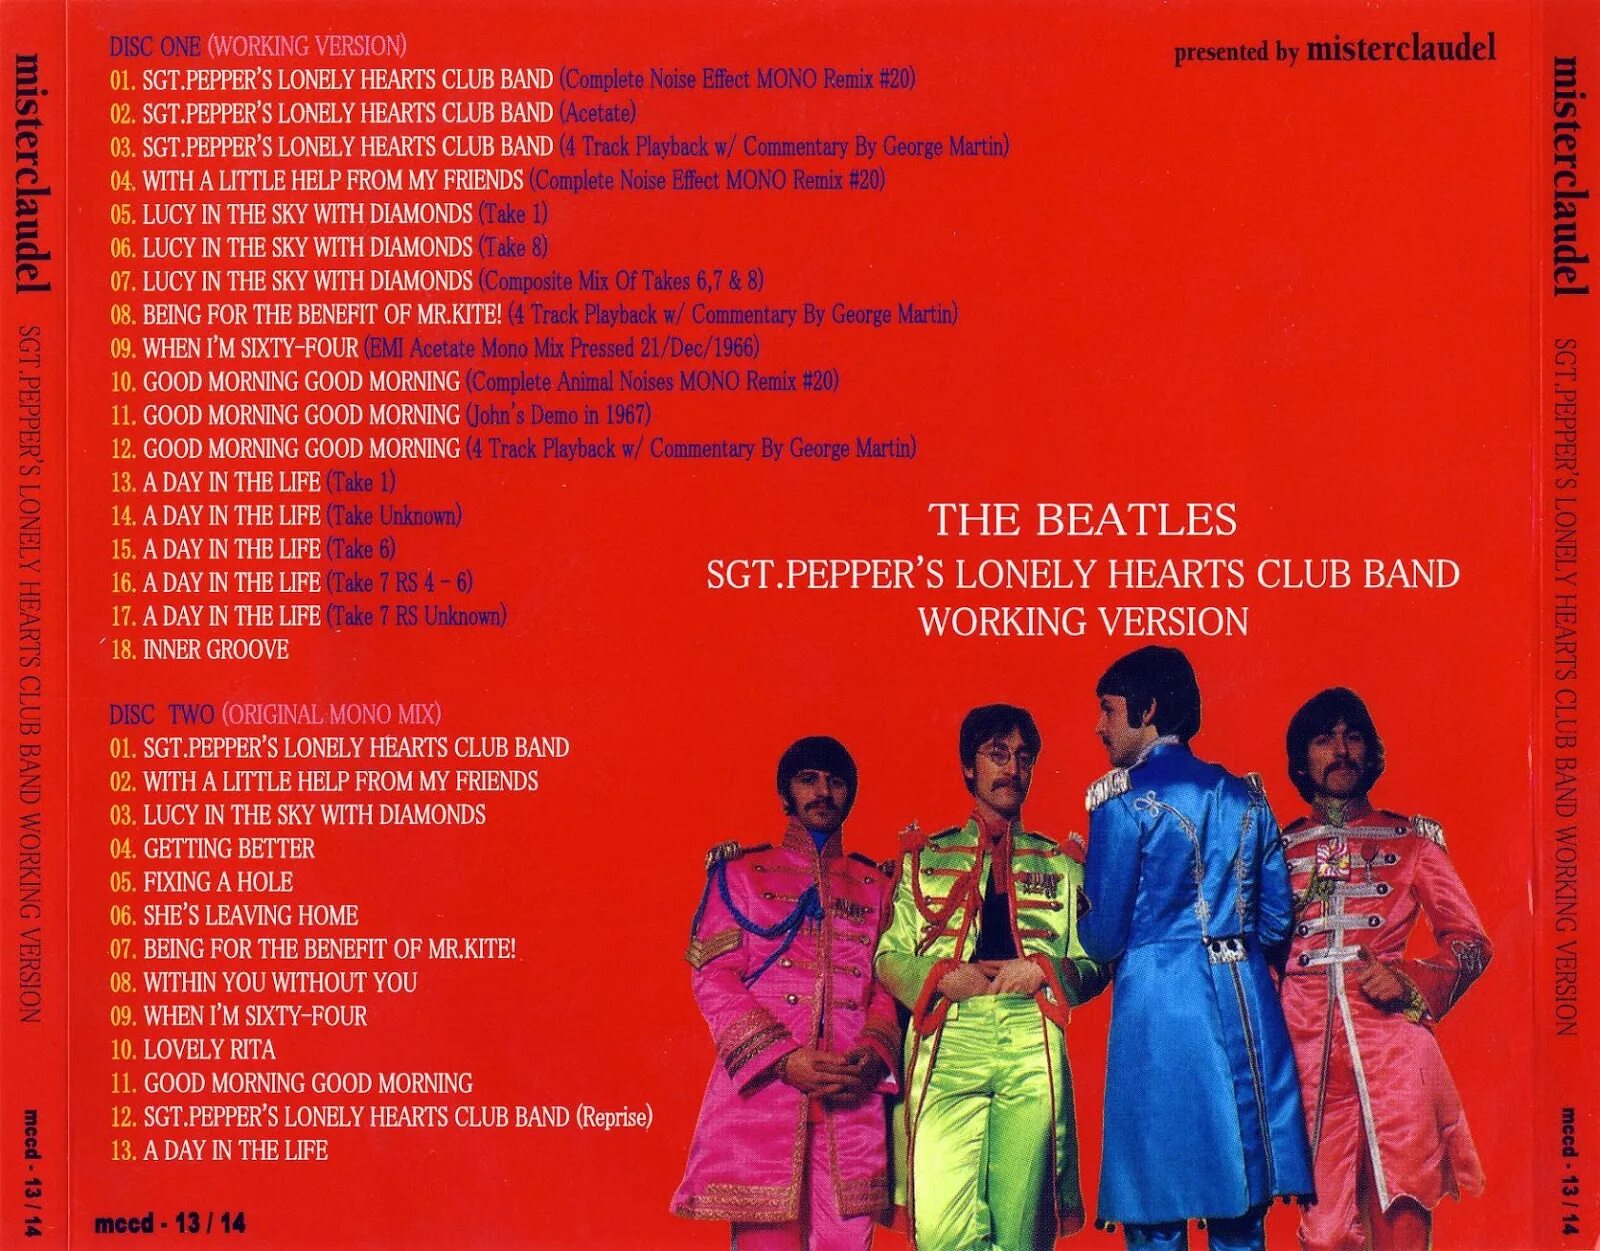 The Beatles Sgt. Pepper's Lonely Hearts Club Band 1967. The Beatles Sgt. Pepper's Lonely Hearts Club Band обложка. Битлз сержант Пеппер. Beatles - Sgt. Pepper's Lonely Hearts Club Band (LP).